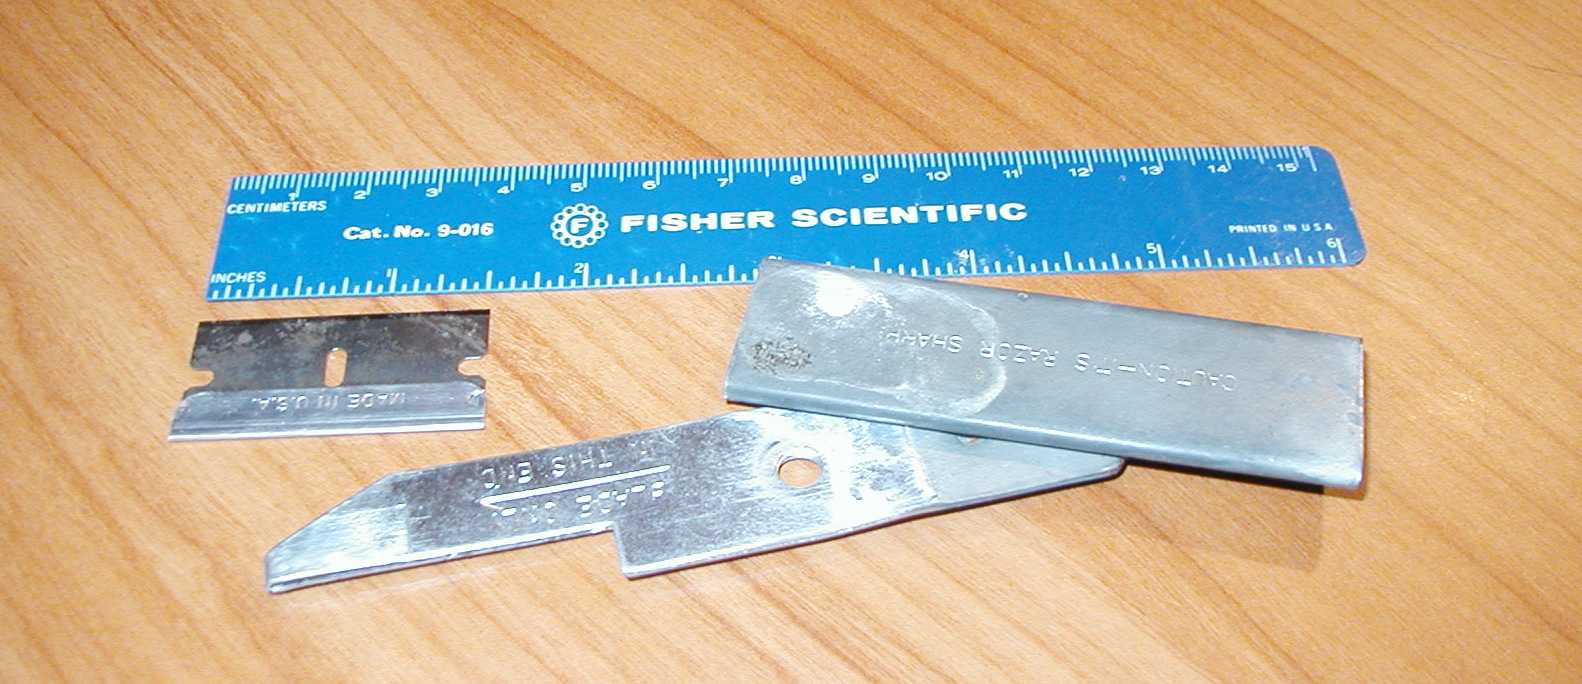 A box cutter disassembled, with razor out.